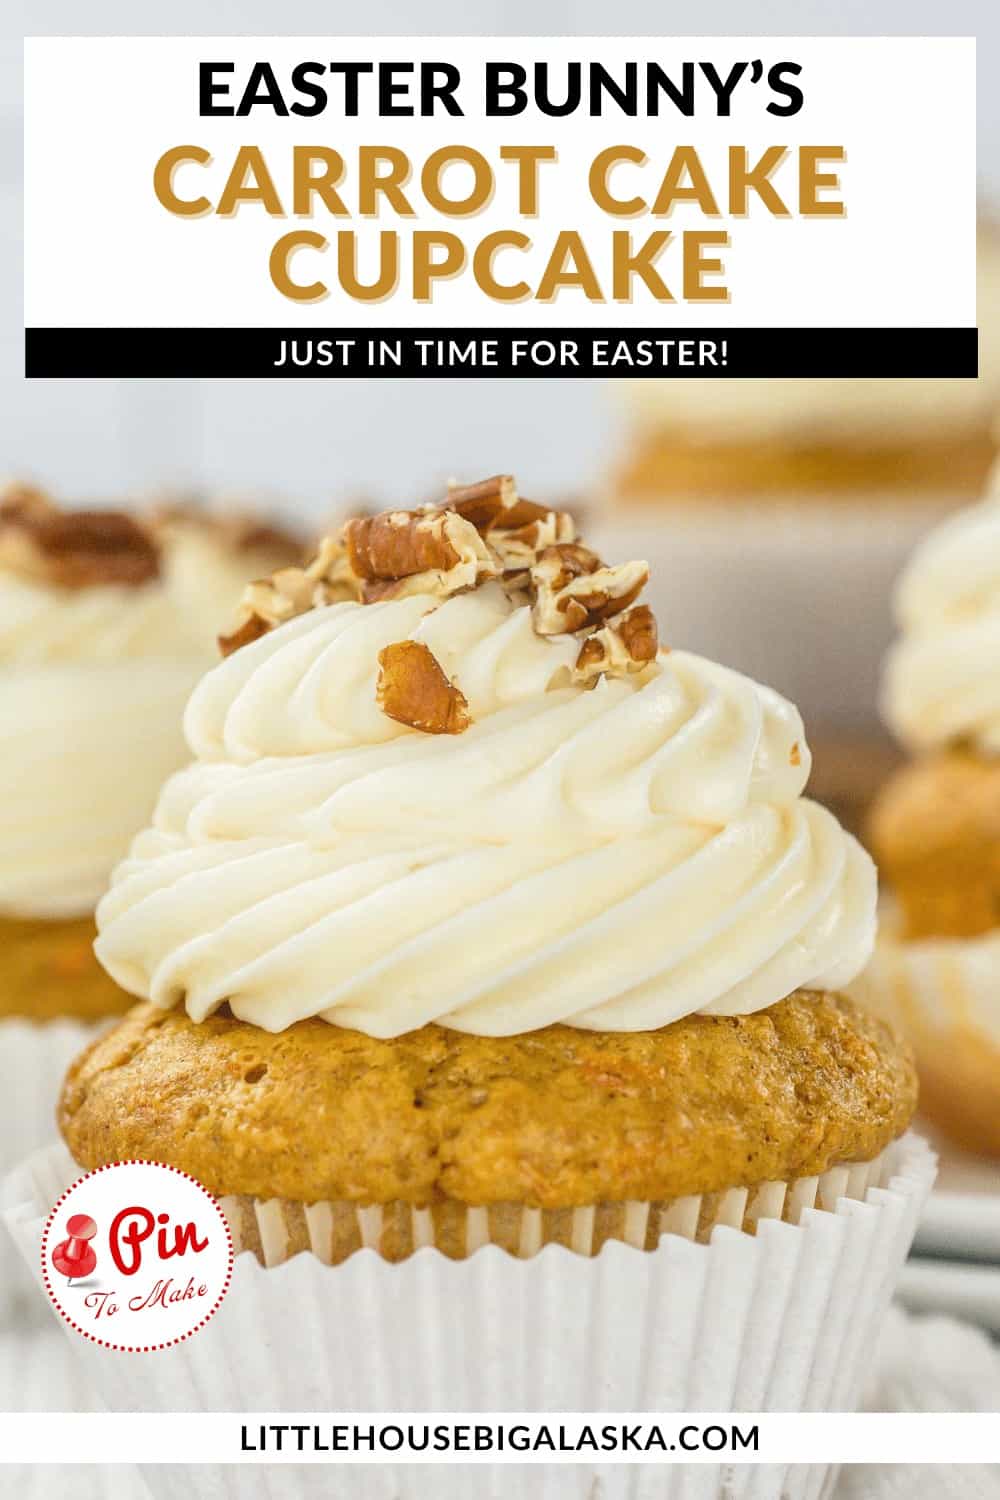 Carrot cake cupcake topped with cream cheese frosting and chopped nuts, themed for easter celebrations.